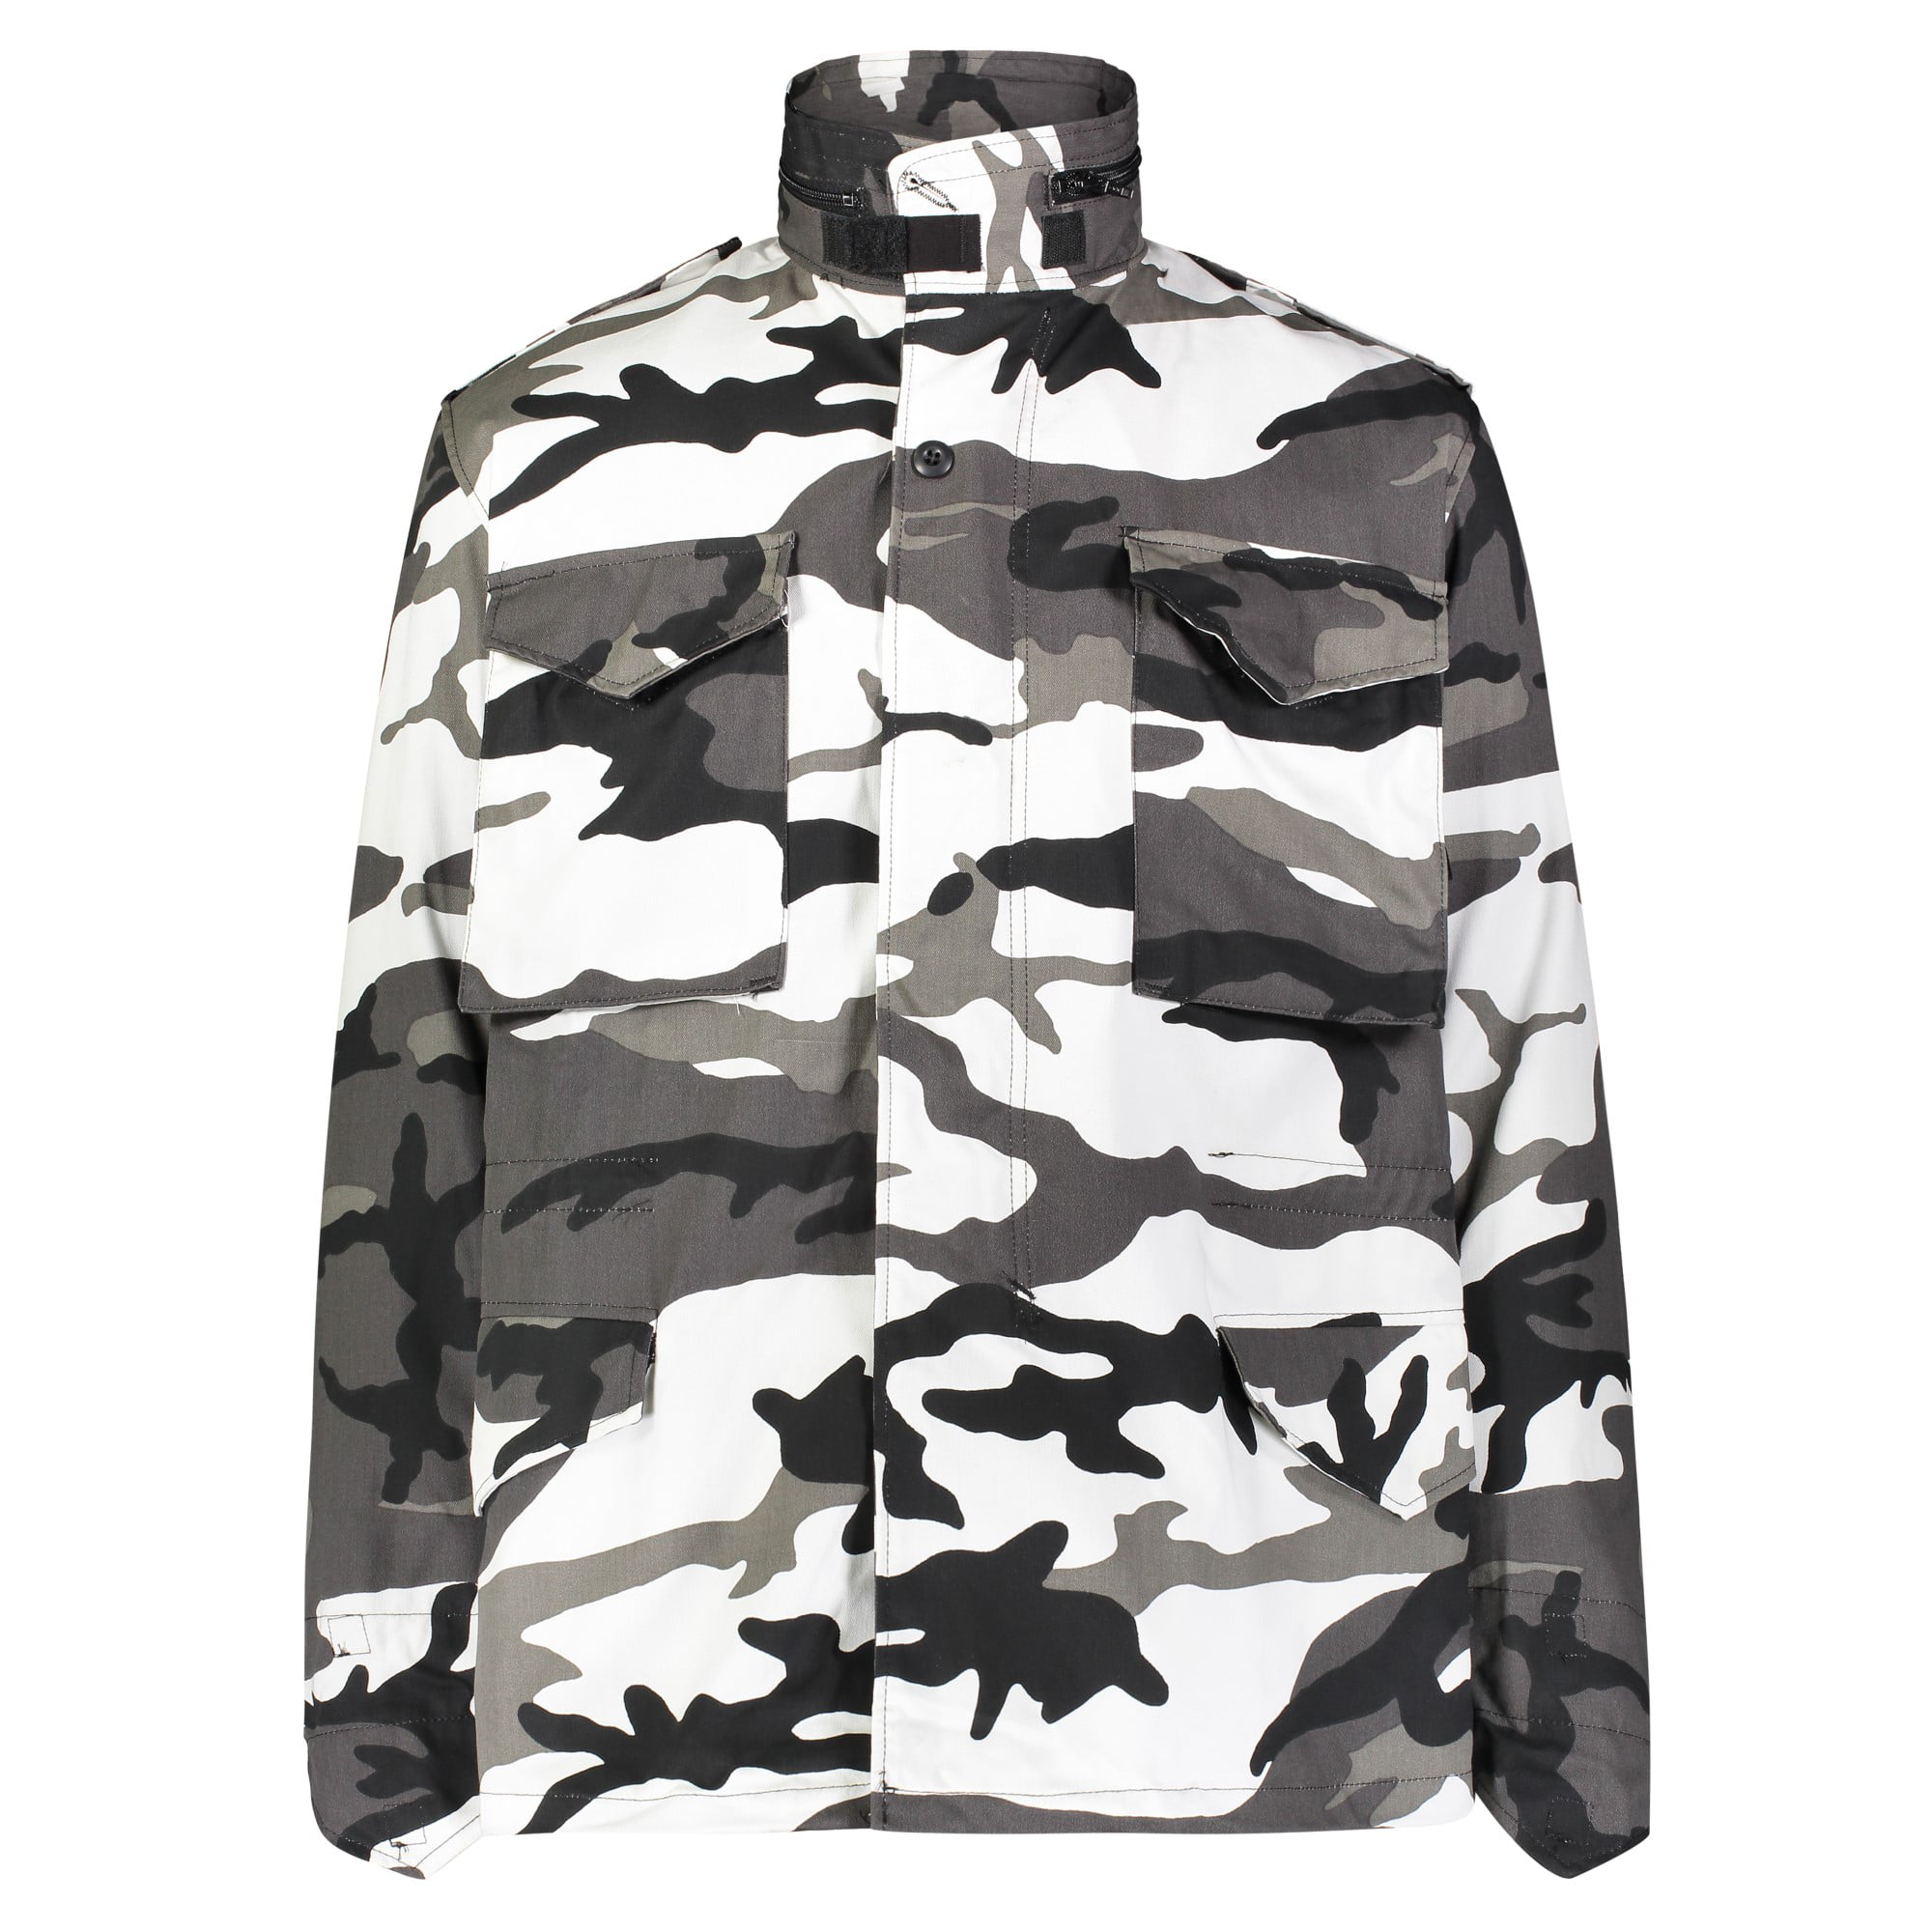 Alpha Industries M-65 Water-Repellent Field Availabl... Jacket. In The Made USA